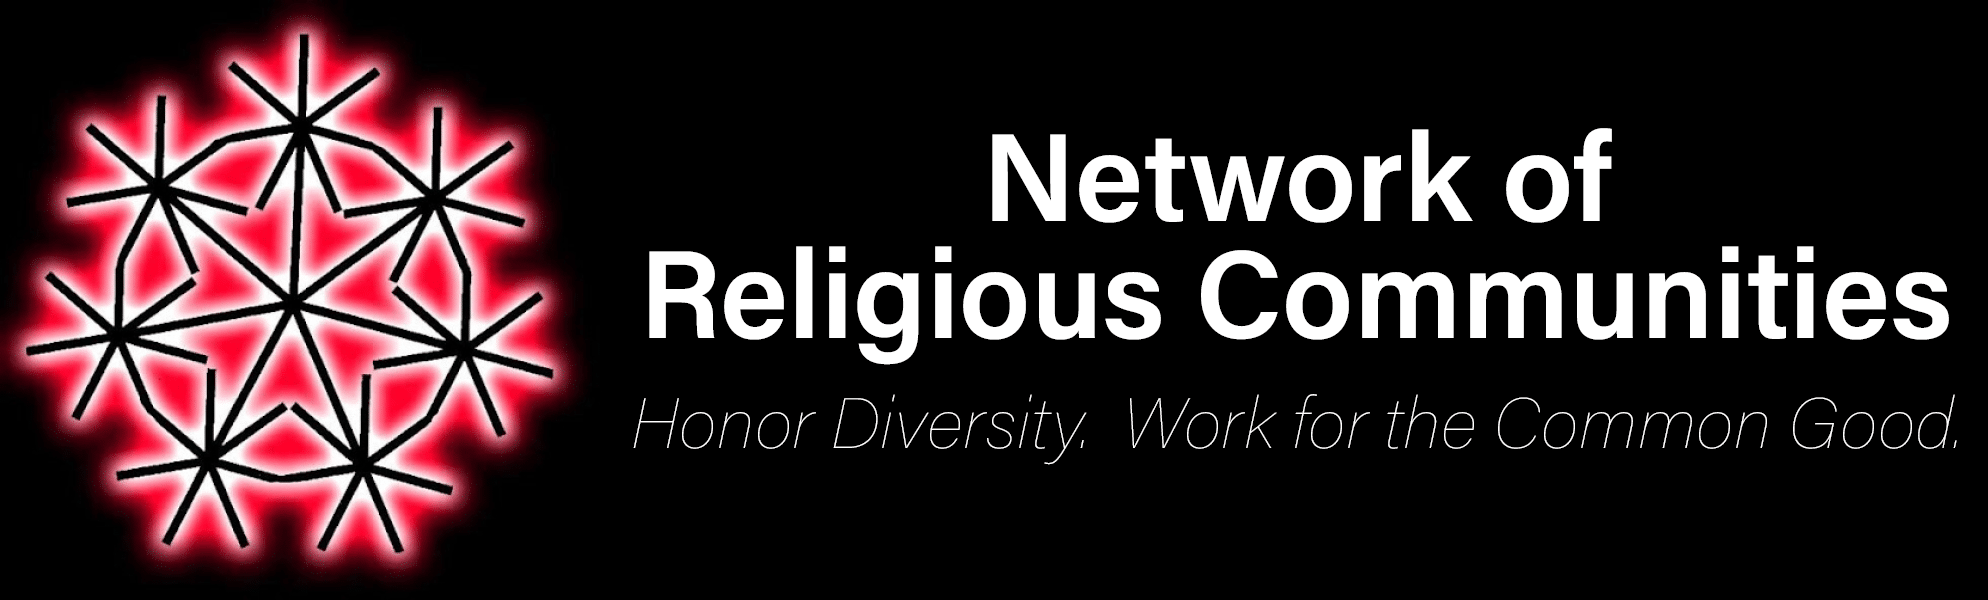 Erie County Voting - Network of Religious Communities